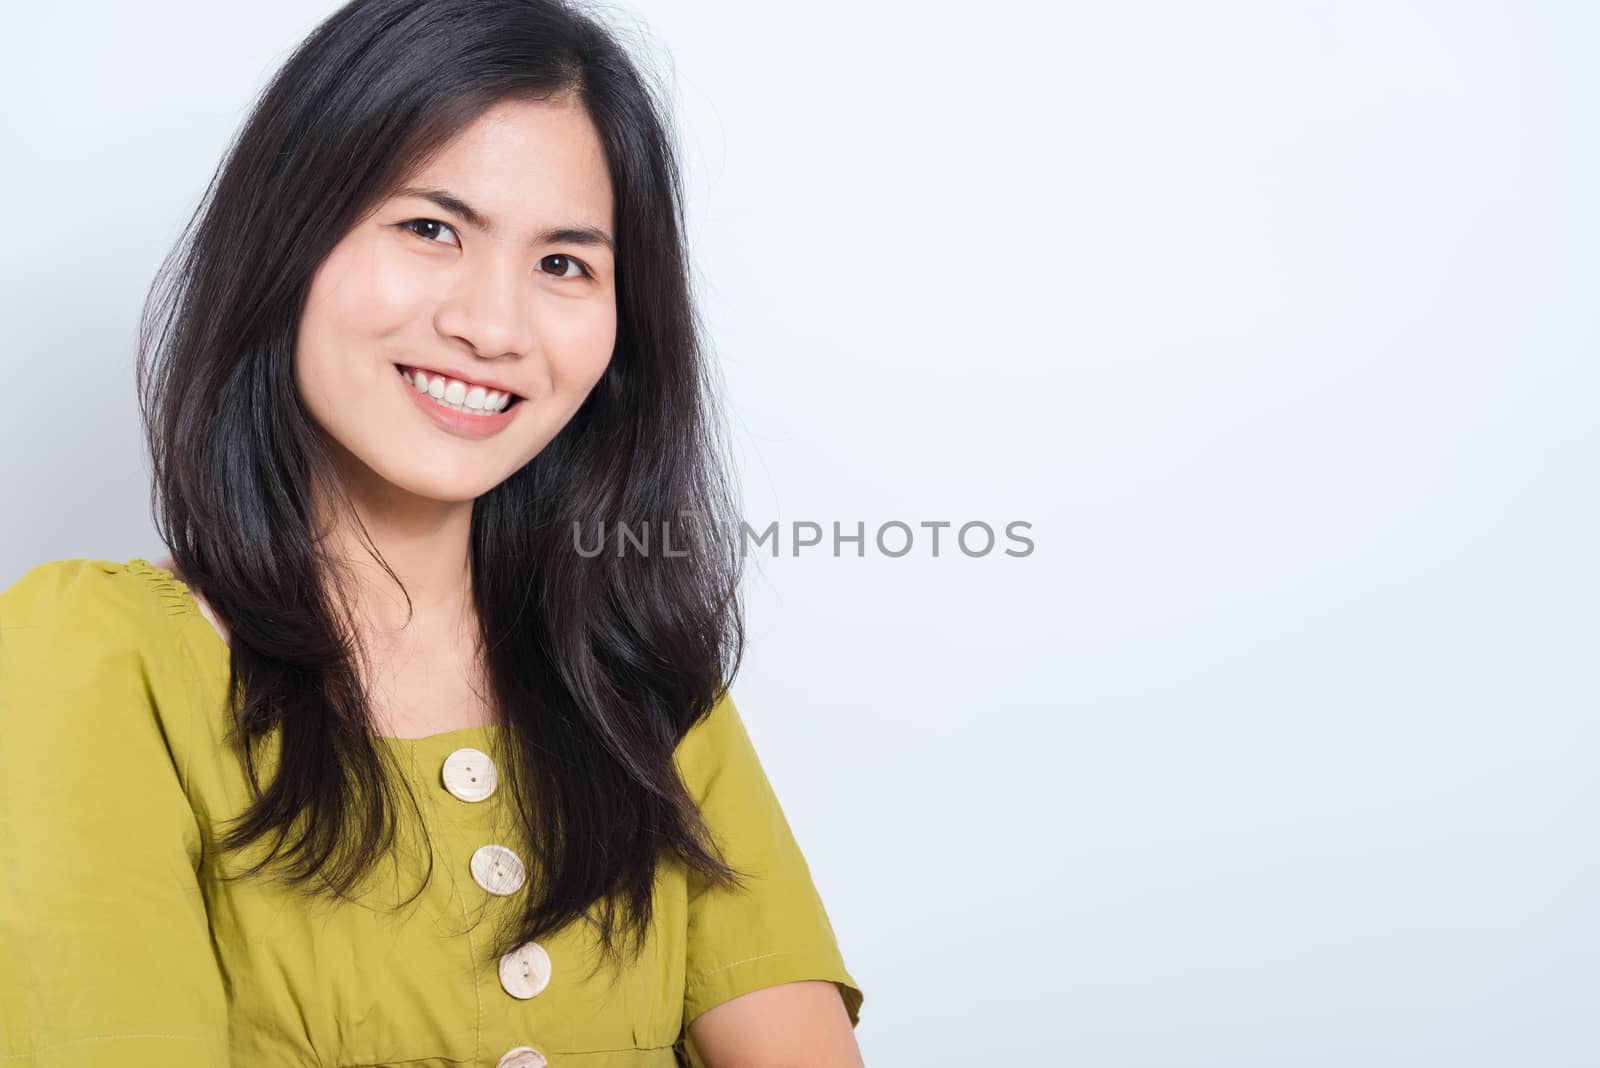 Portrait Asian beautiful young woman standing smile seeing white teeth, She looking at the camera, shoot photo in studio on white background. There was a copy space to put text on the right-hand side.